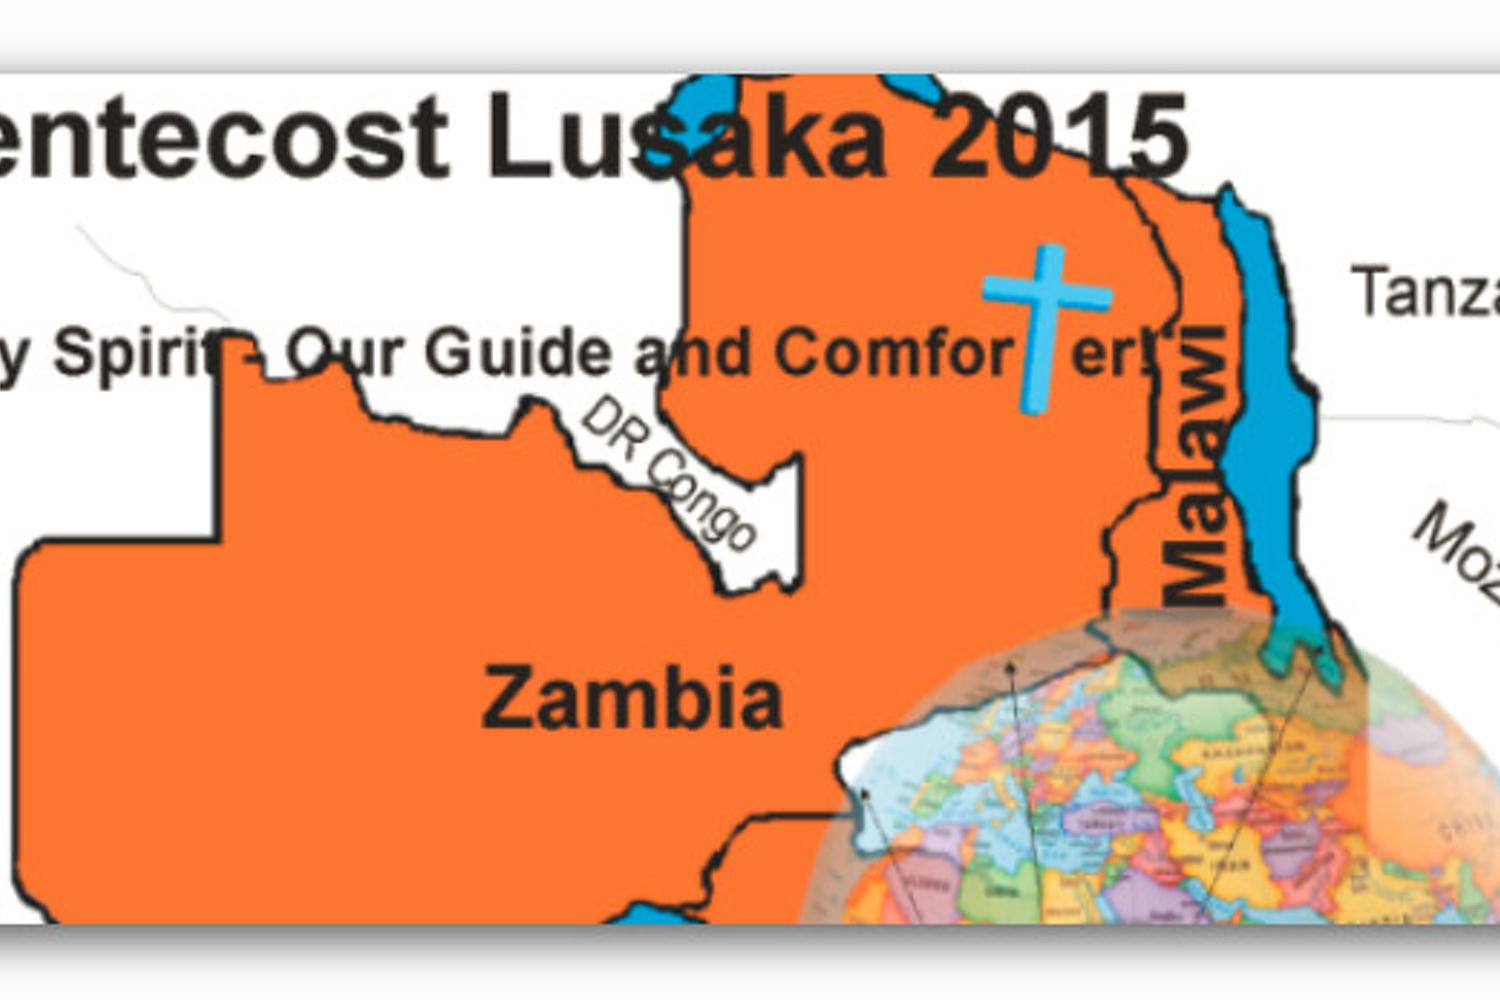 Pfingsten 2015 in Lusaka: „Holy Spirit – Our Guide and Comforter”